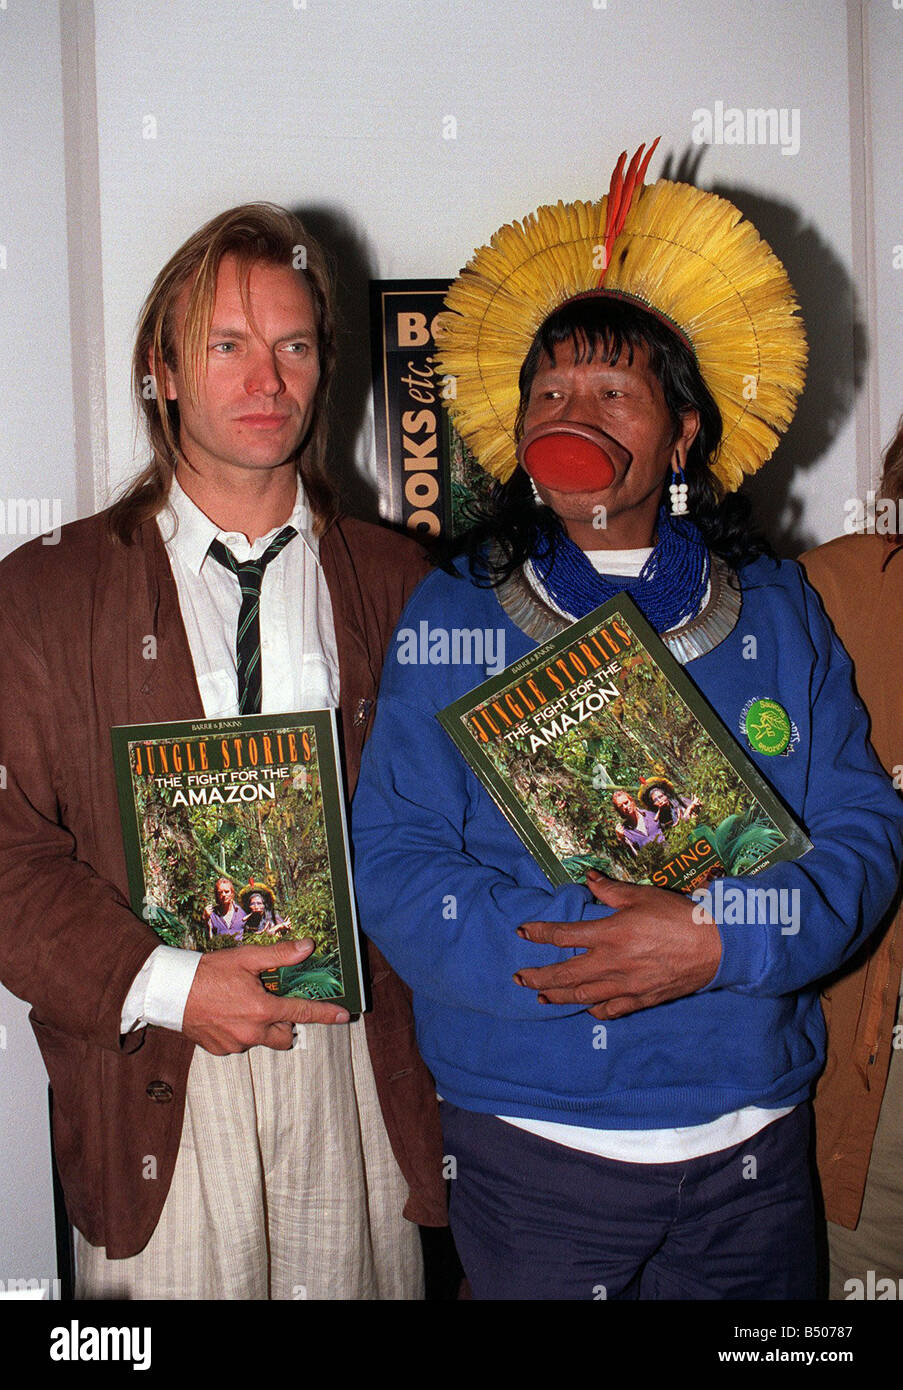 Sting with Raoni a Kayapo Indian Chief April 1989 at news press conference to promote the book Jungle Stories The Fight For The Stock Photo